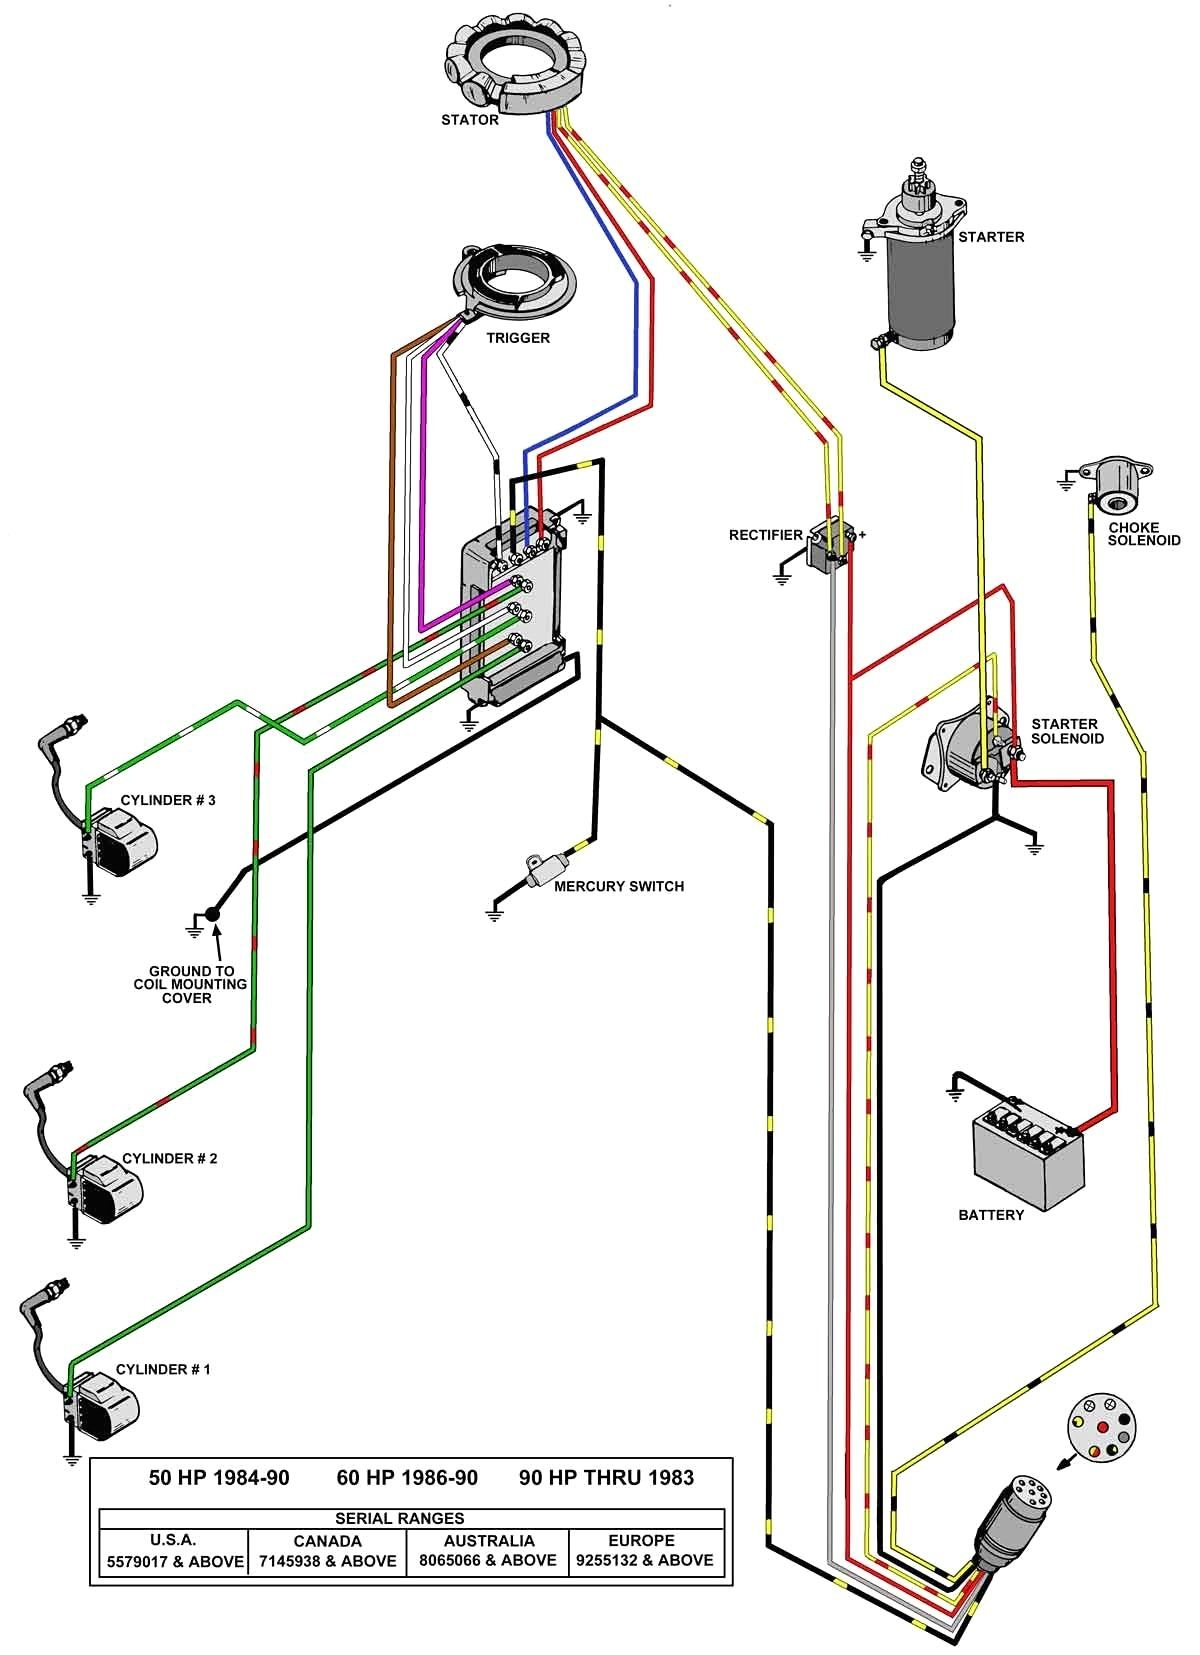 50 Hp Mercury Outboard Wiring Diagram - Wiring Diagram Explained - Evinrude Ignition Switch Wiring Diagram